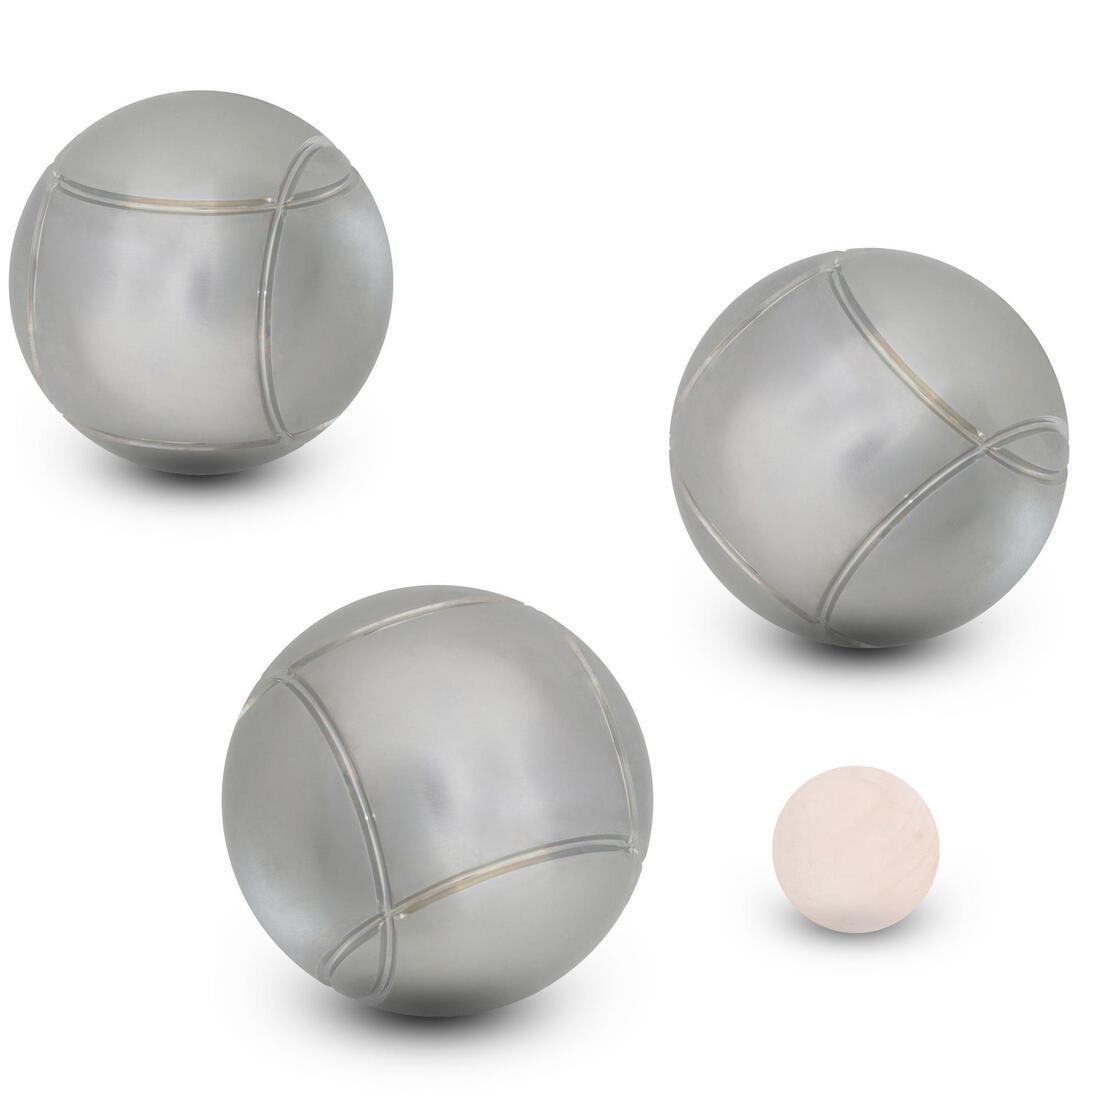 GEOLOGIC - Smooth Recreational Petanque Boules 100 Tri-Pack